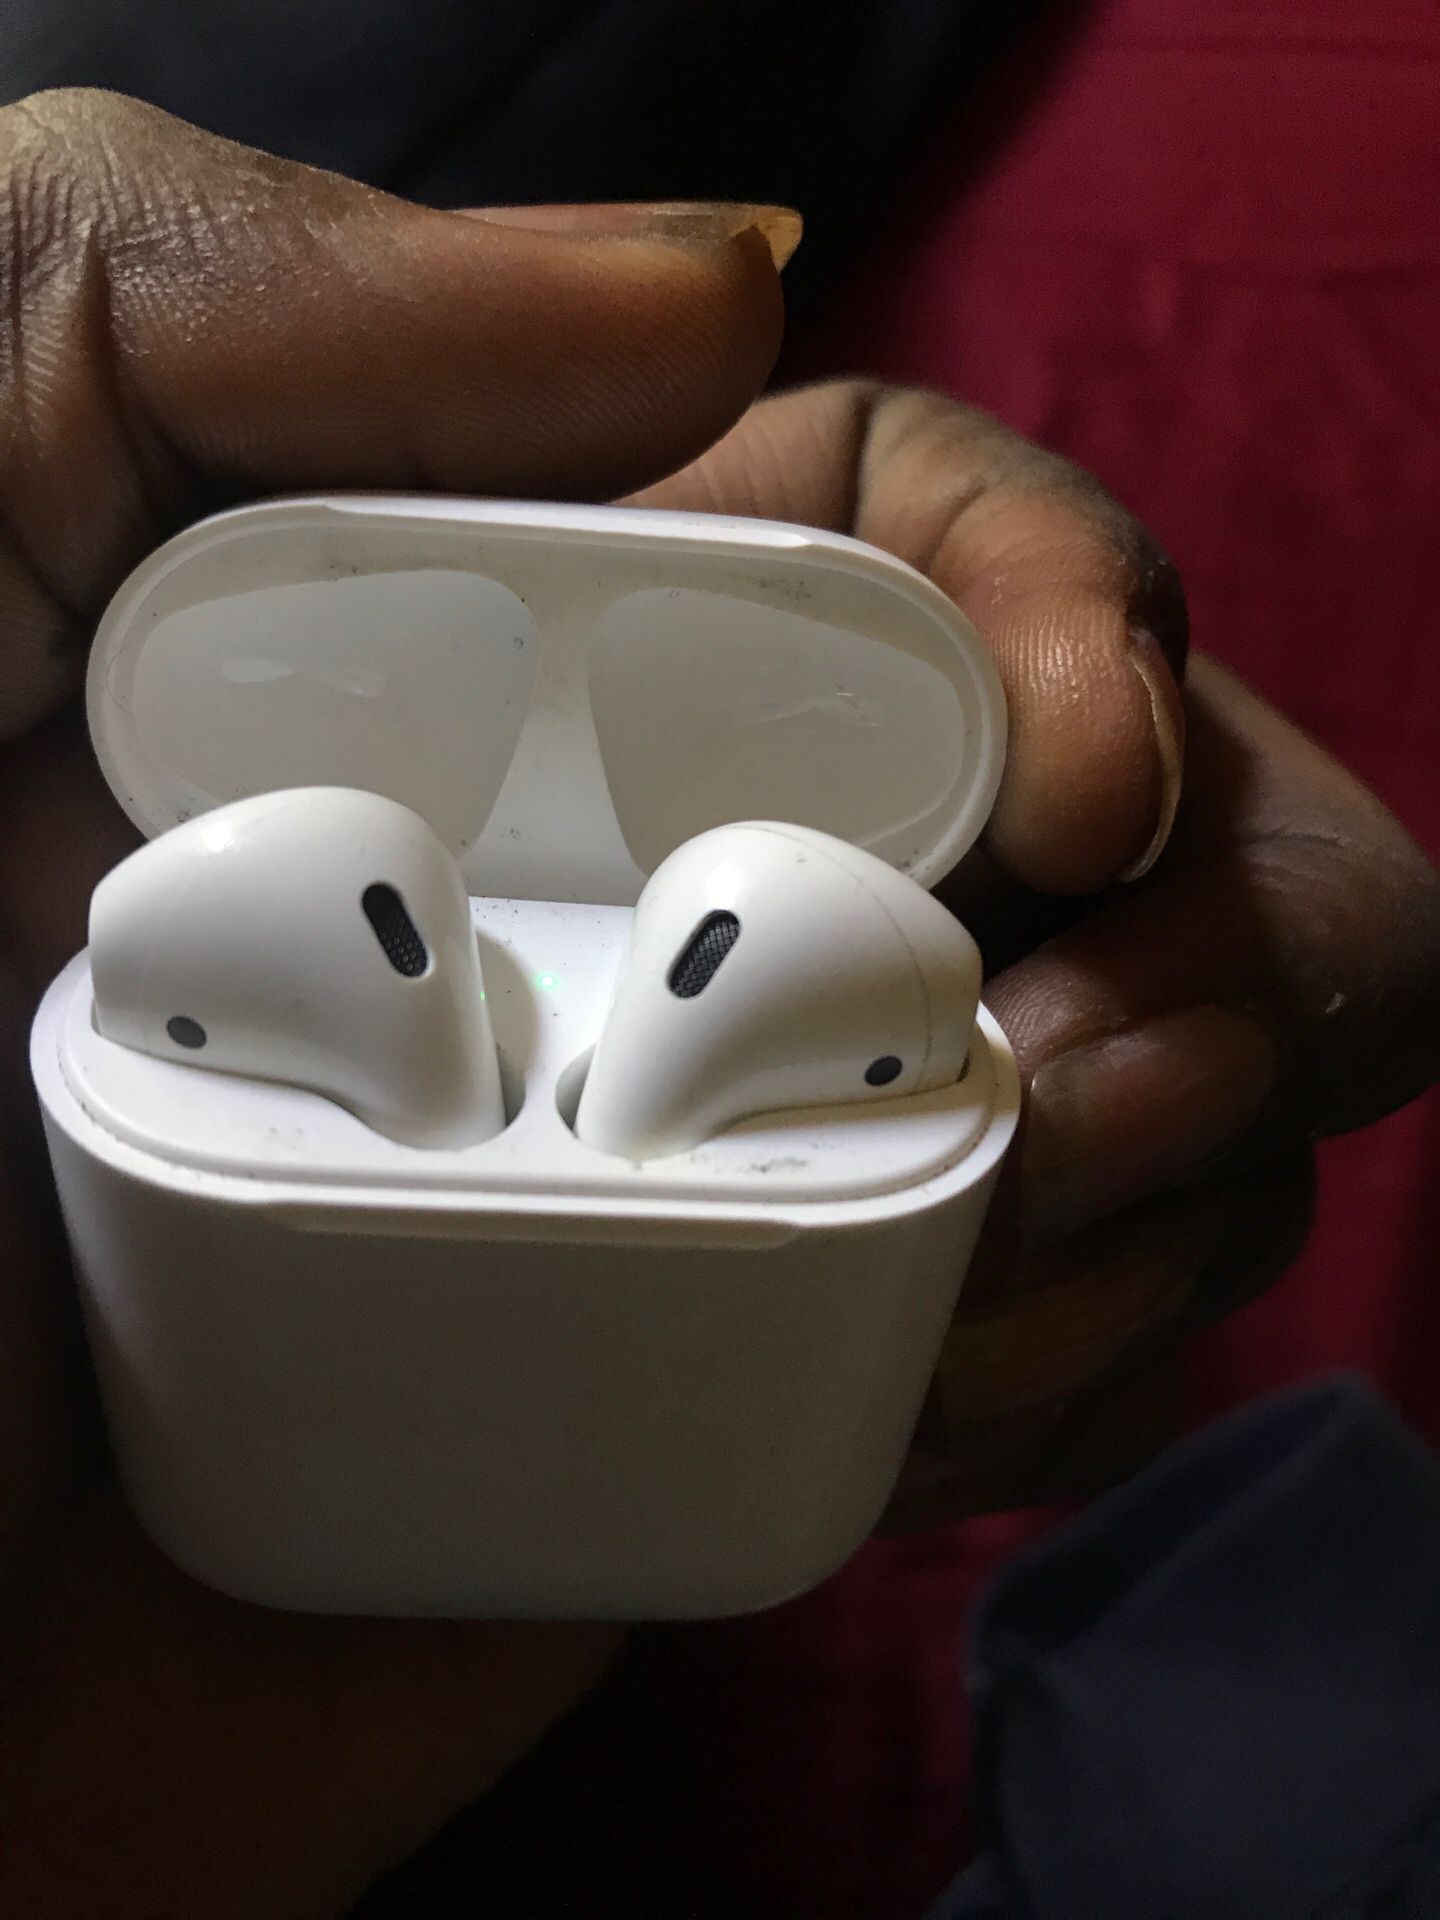 Apple AirPods 2s